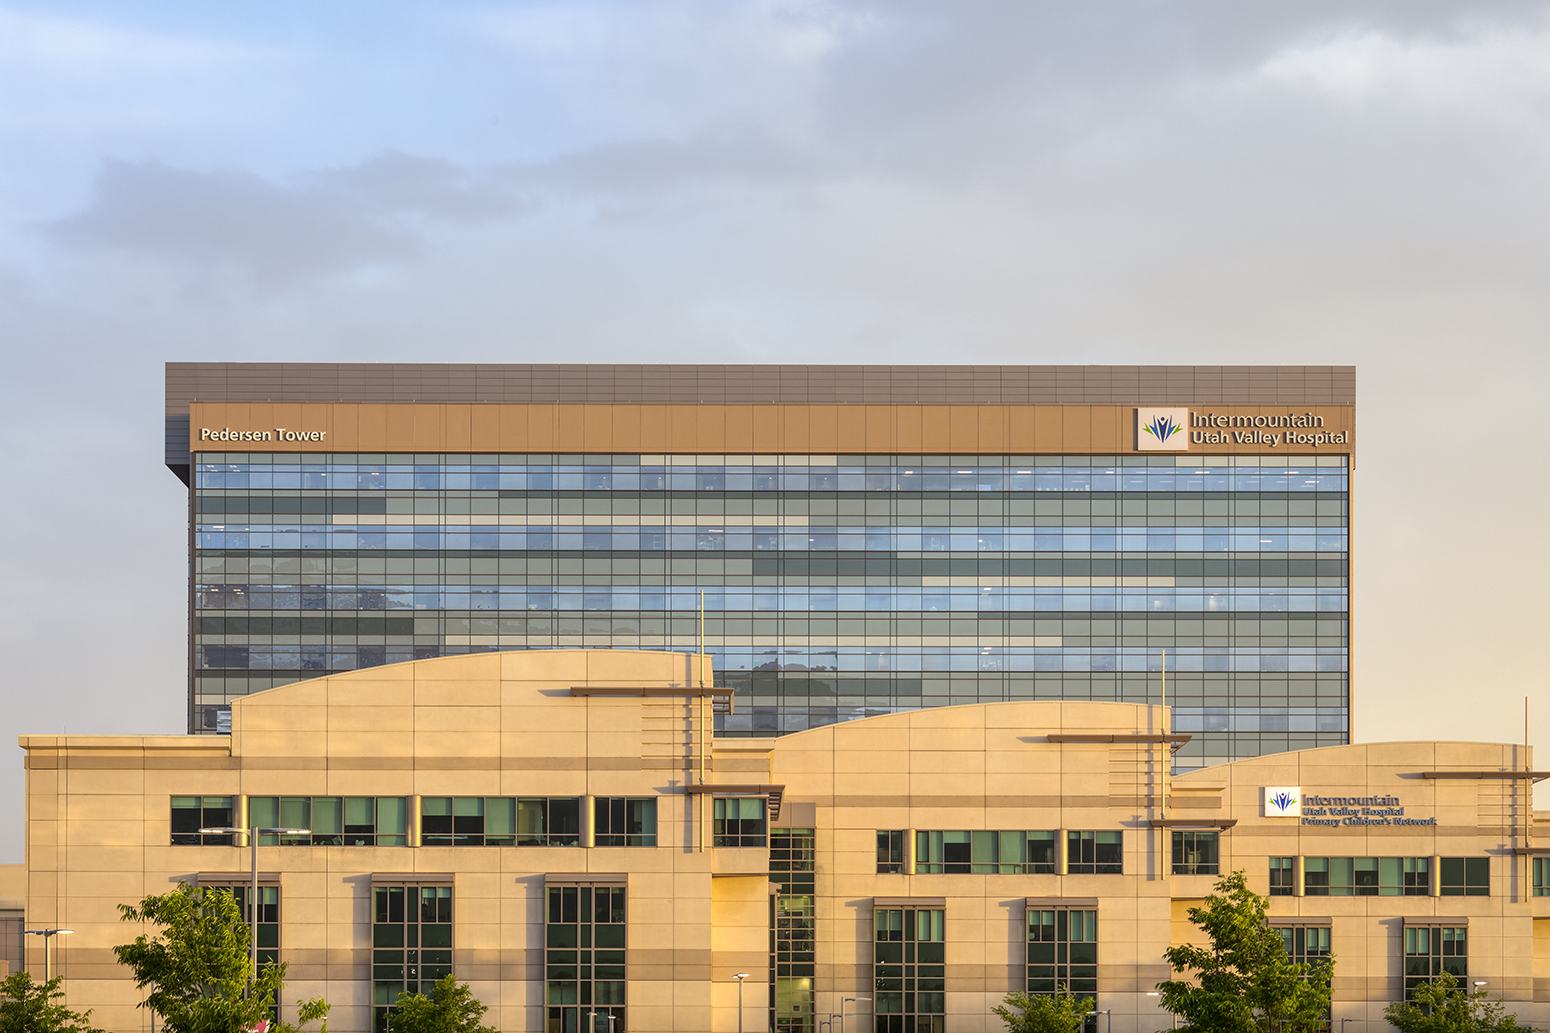 Utah Valley Hospital for HDR Inc & Intermountain Health.Architectural Photography by: Paul Richer / RICHER IMAGES